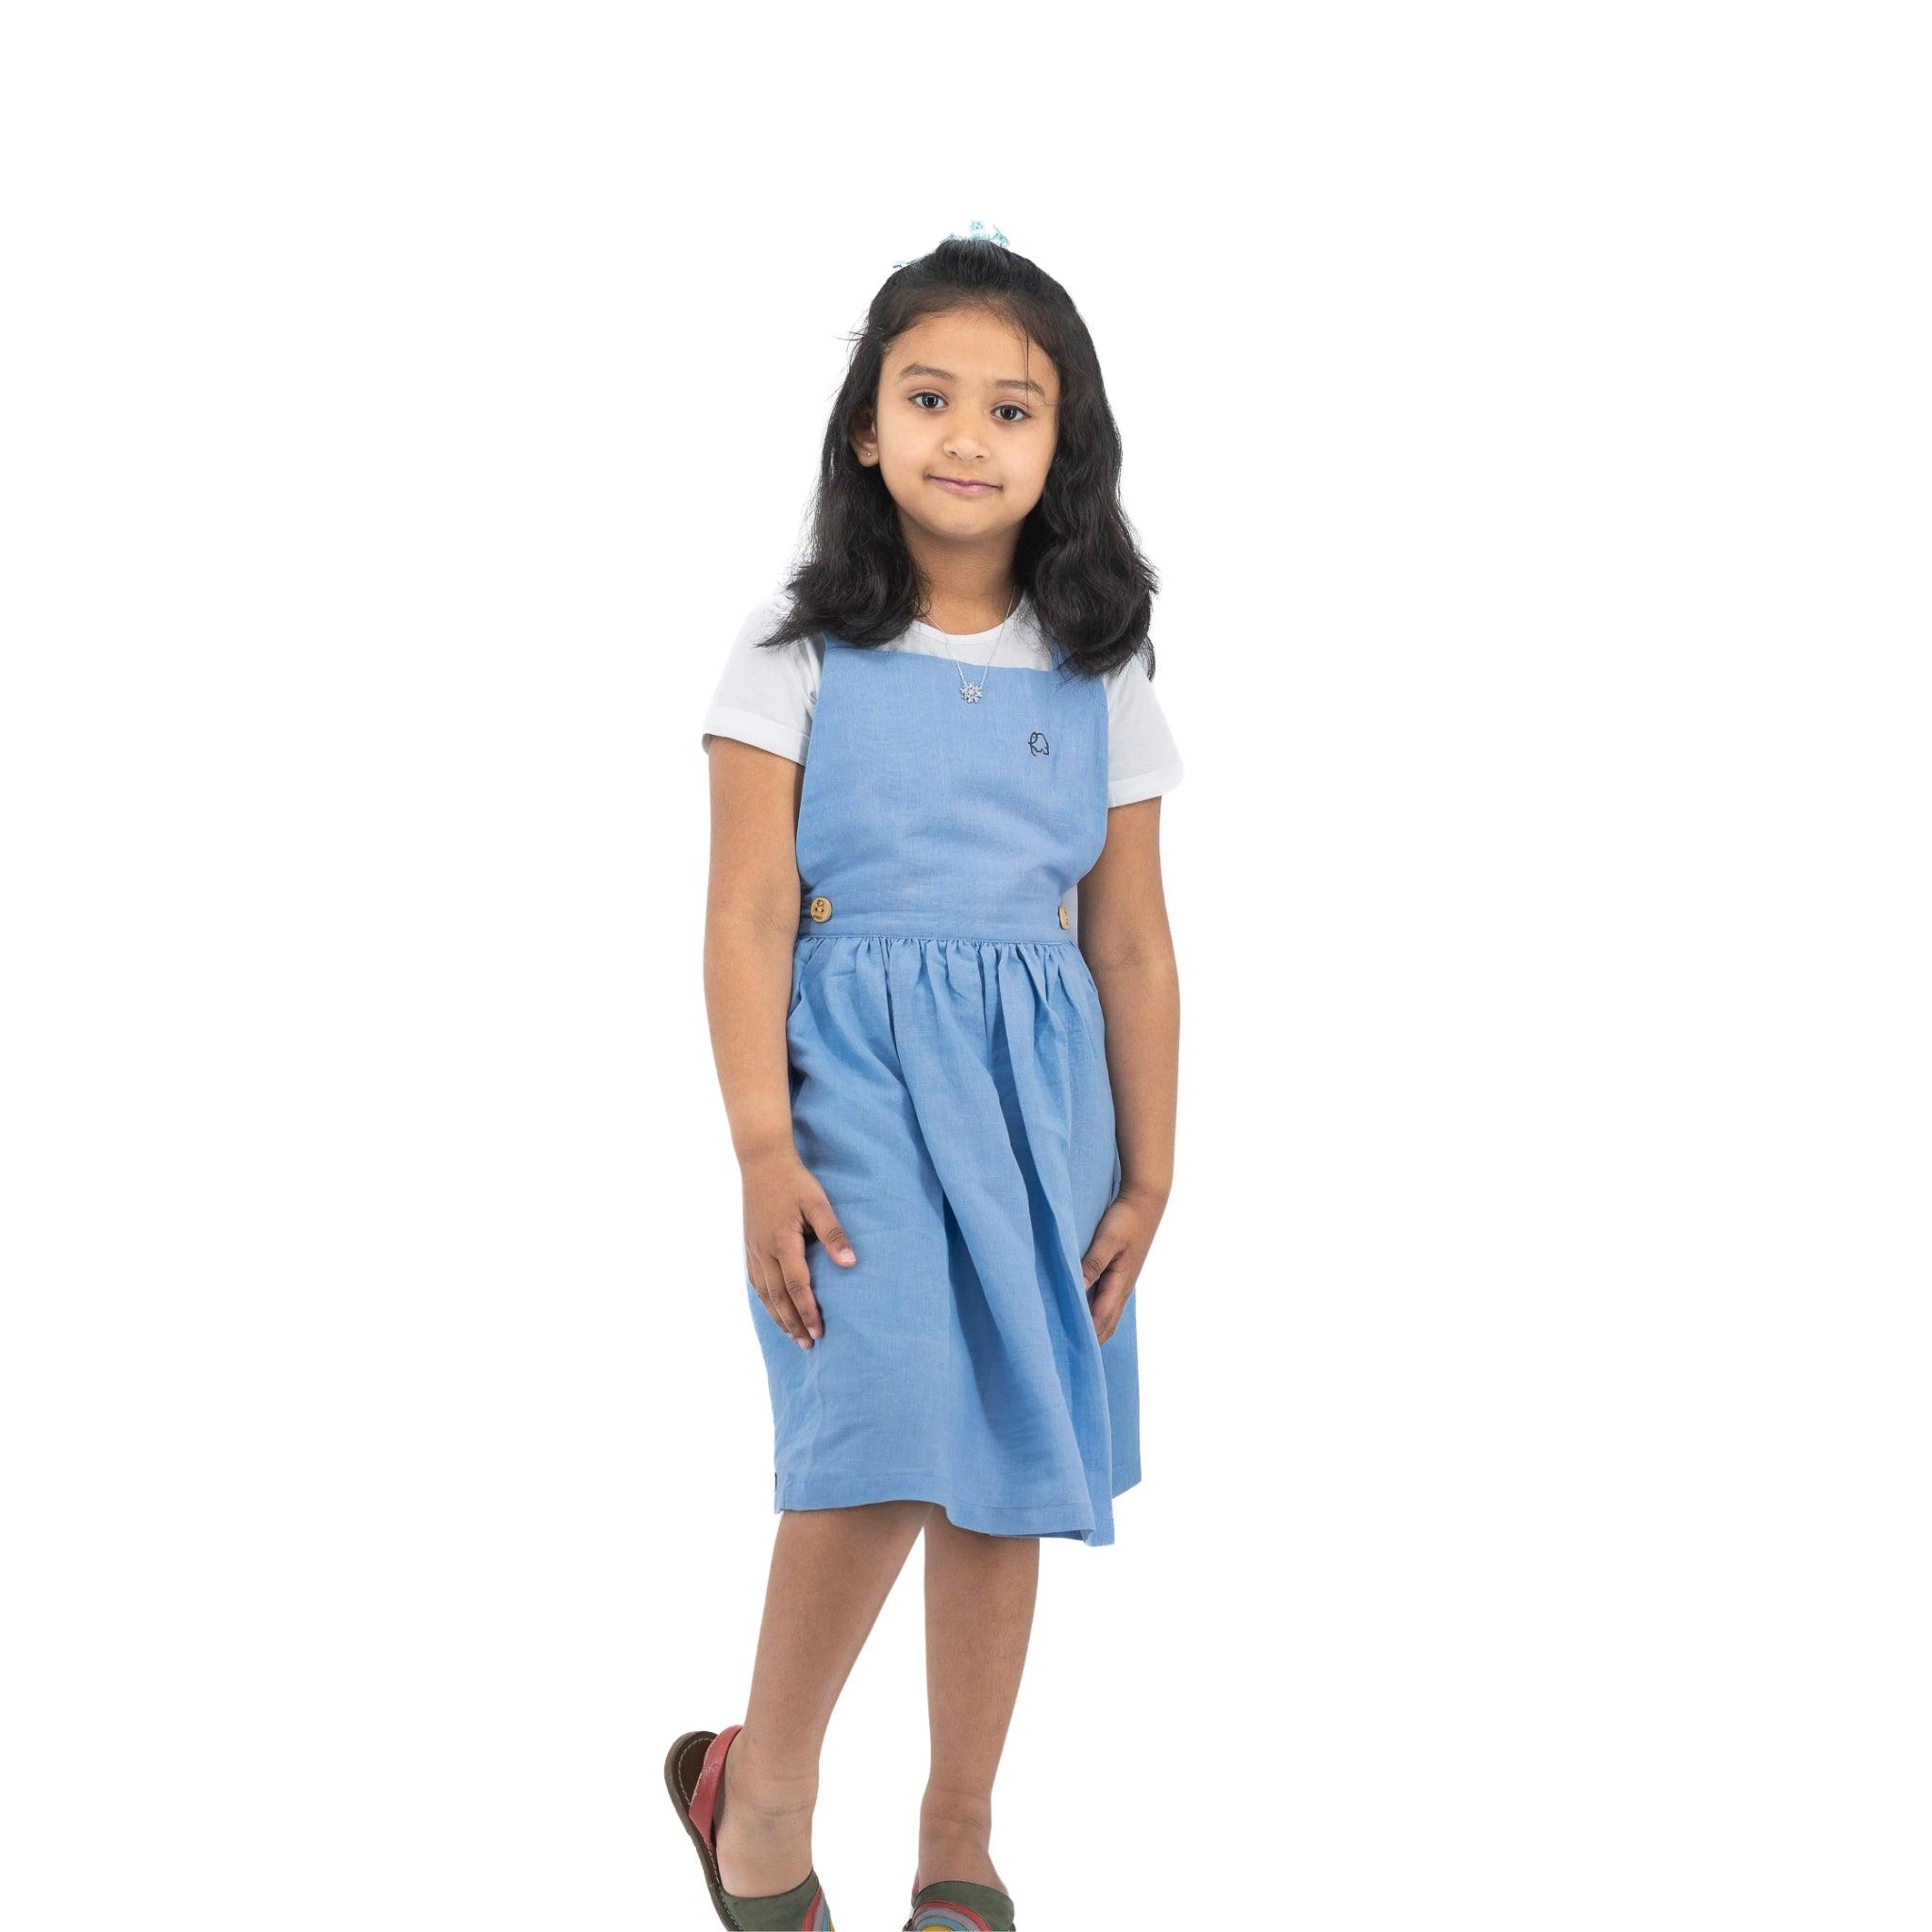 Young girl in a Karee cerulean blue linen pinafore standing alone against a white background, looking at the camera with a slight smile.